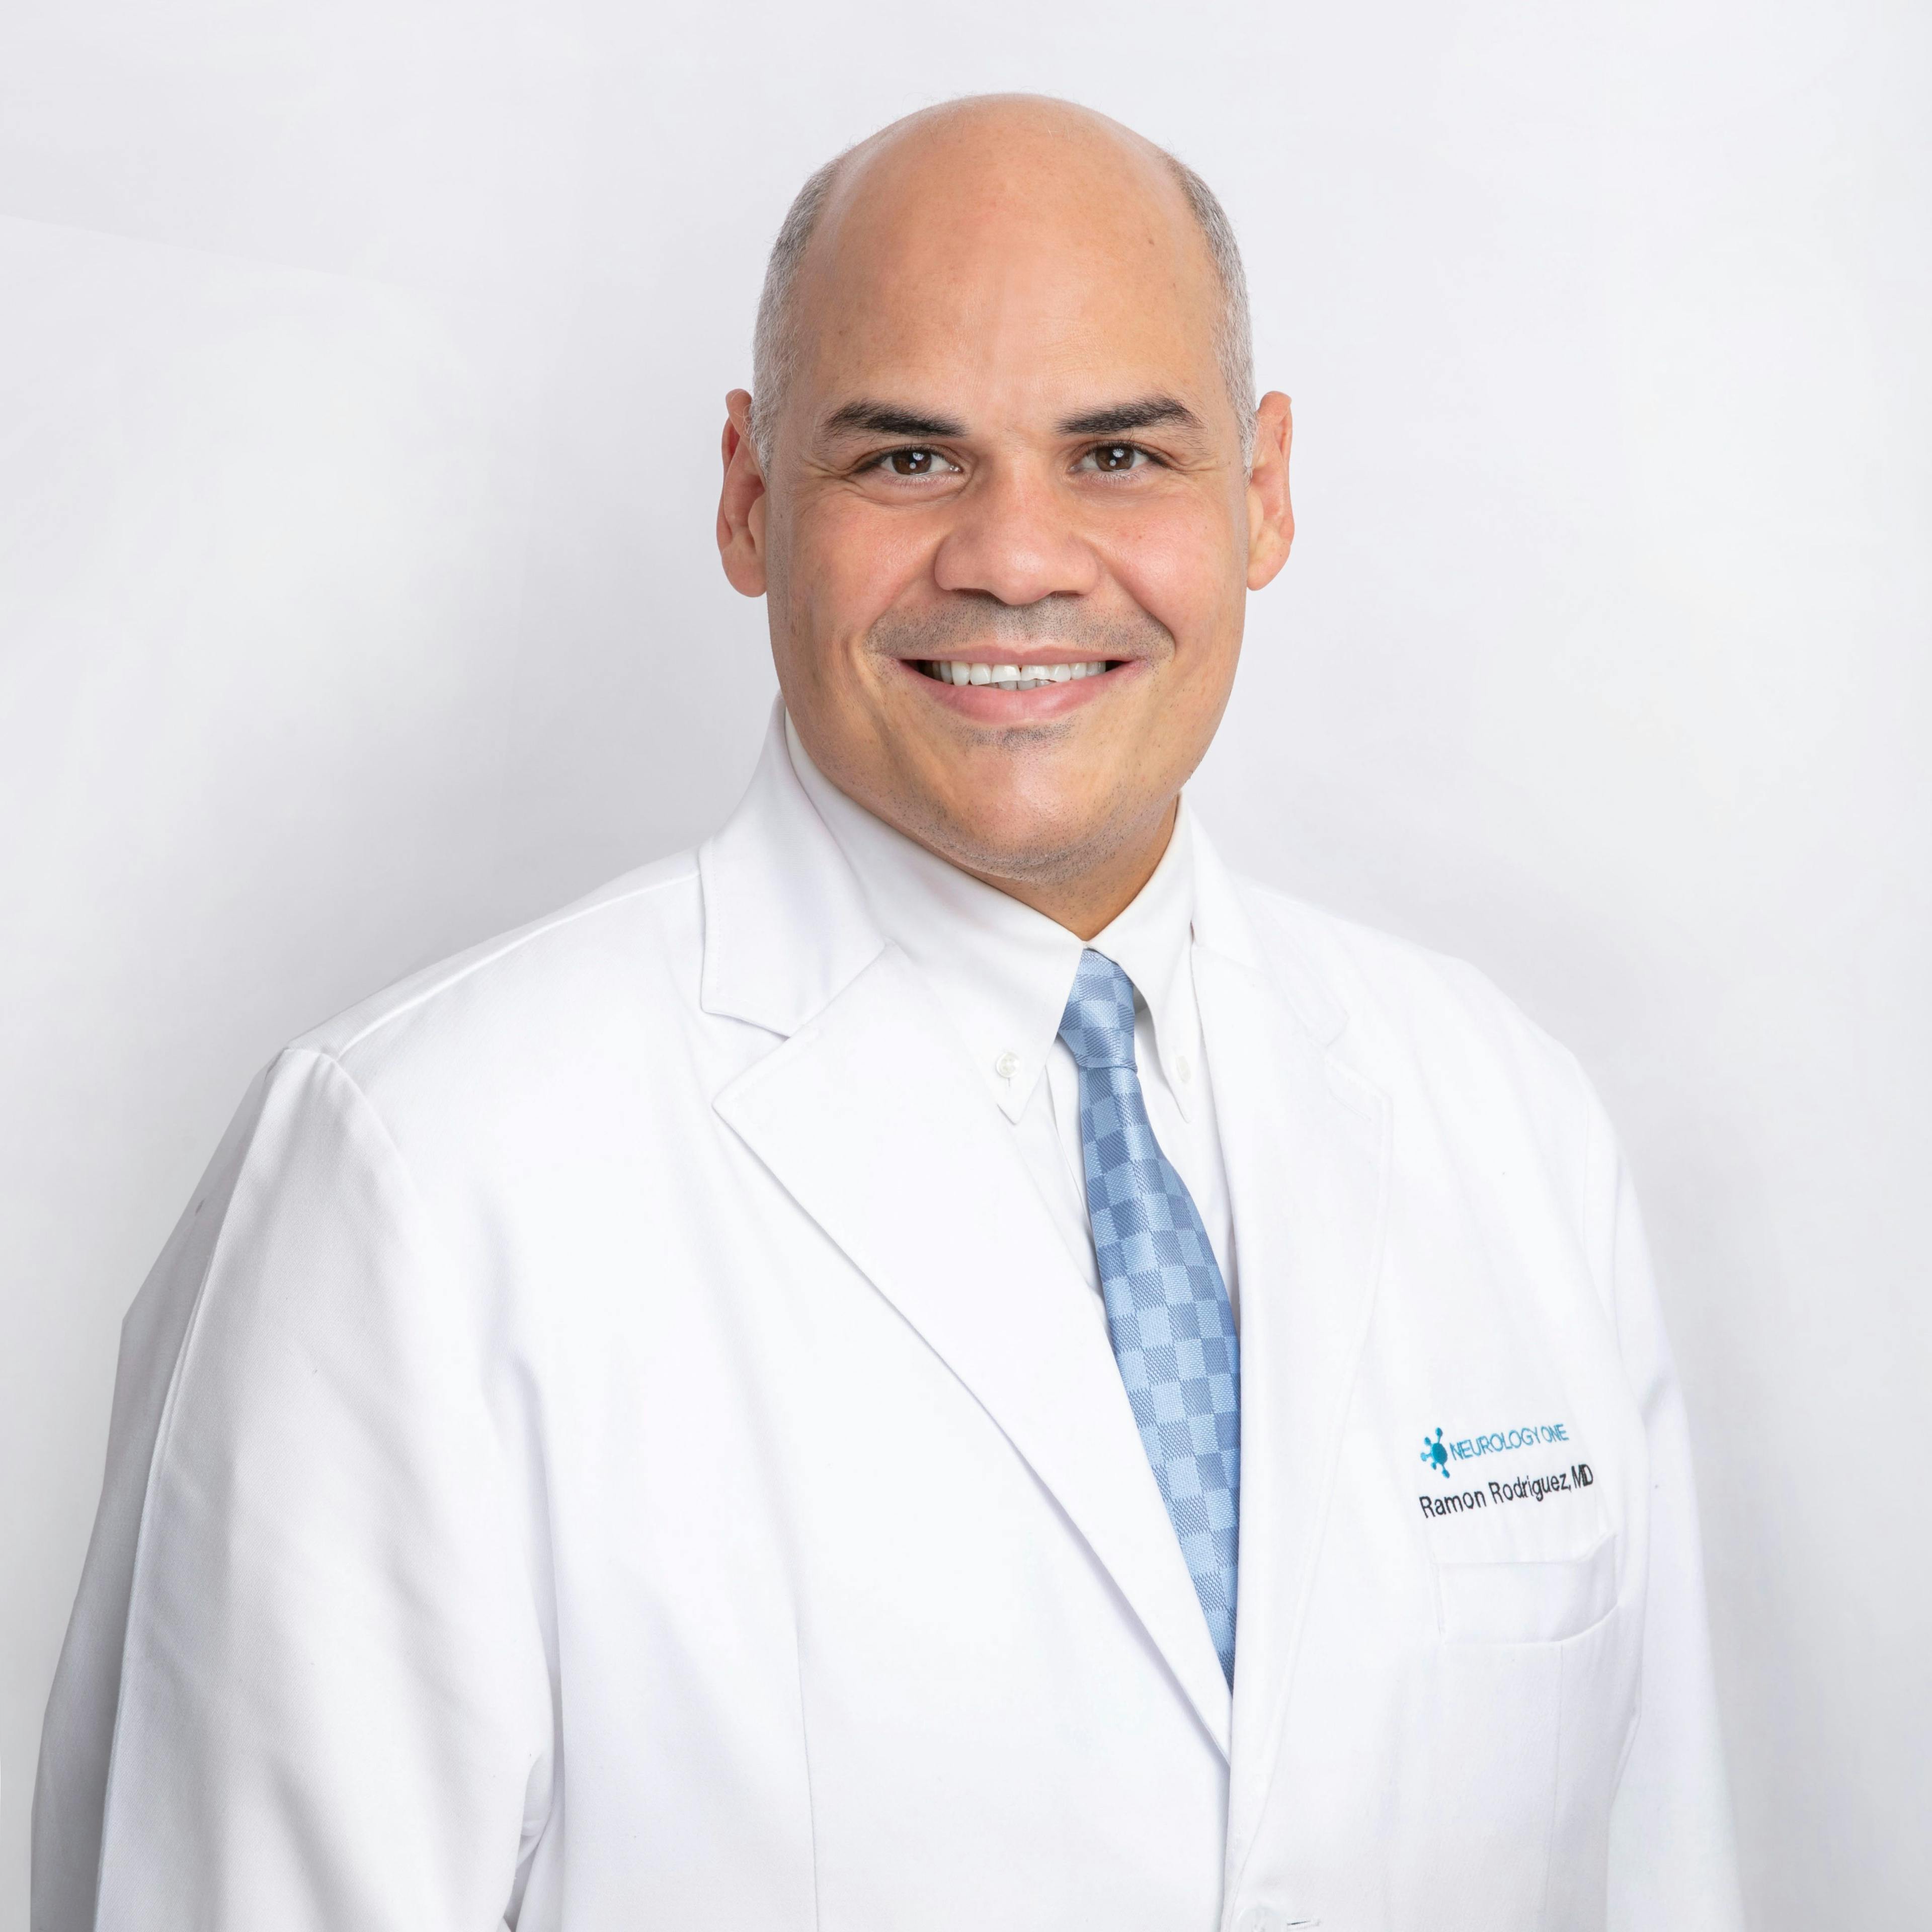 Ramon L. Rodriguez, MD, Neurologist and Movement Disorders Specialist and Medical Director, Neurology One